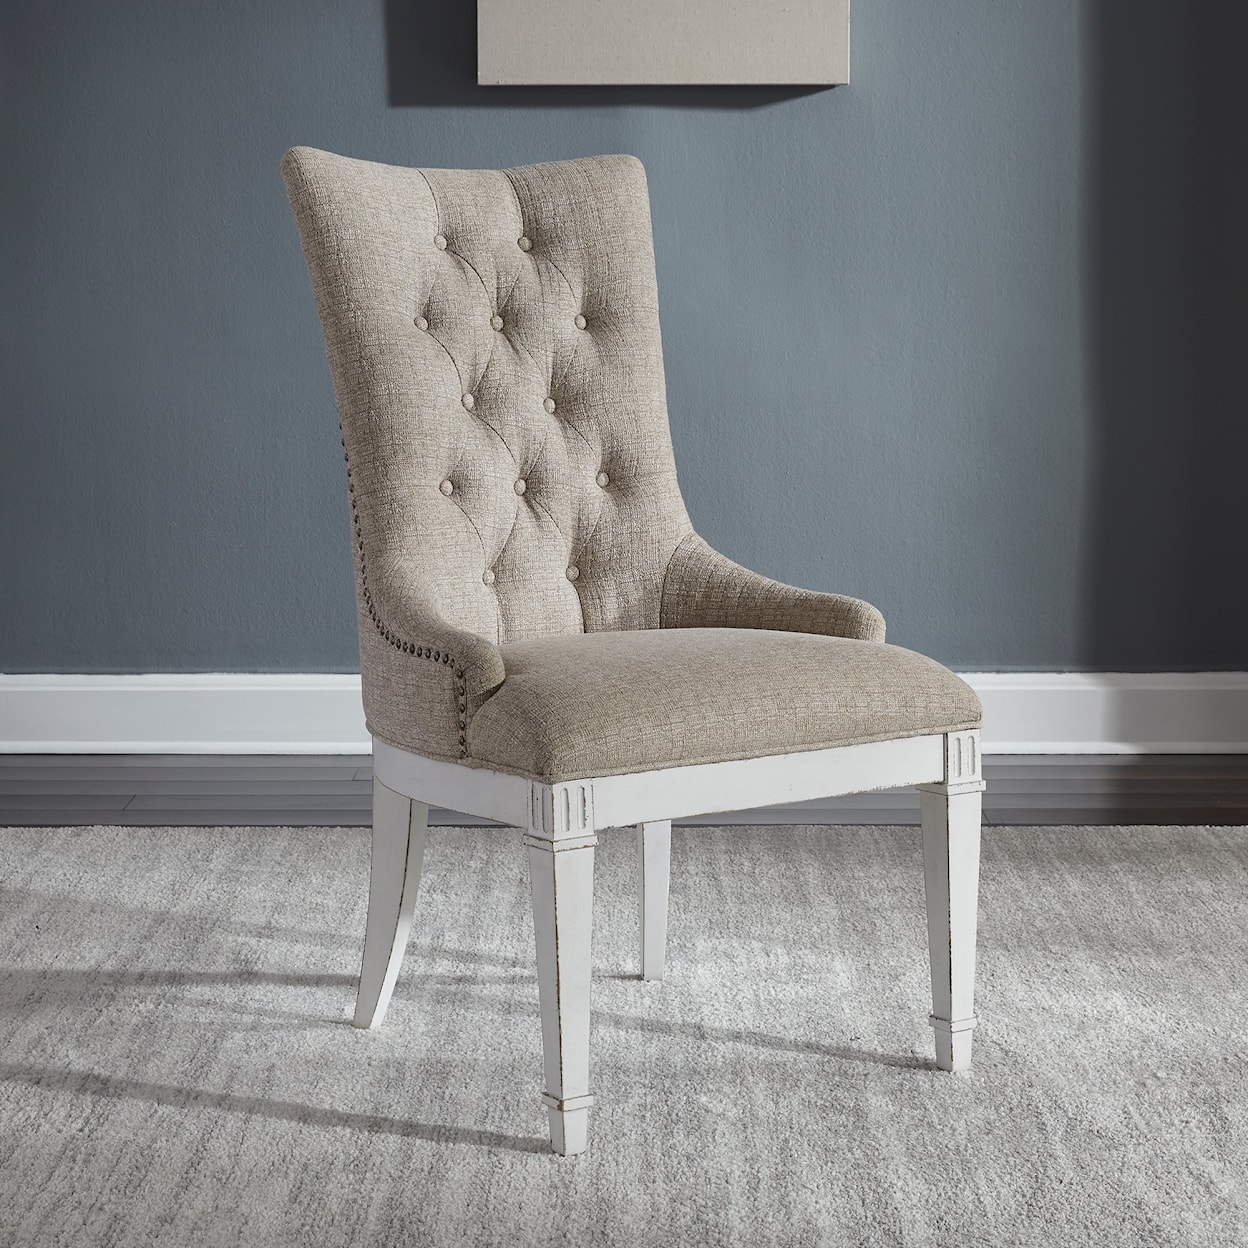 Liberty Furniture Abbey Park Upholstered Hostess Chair